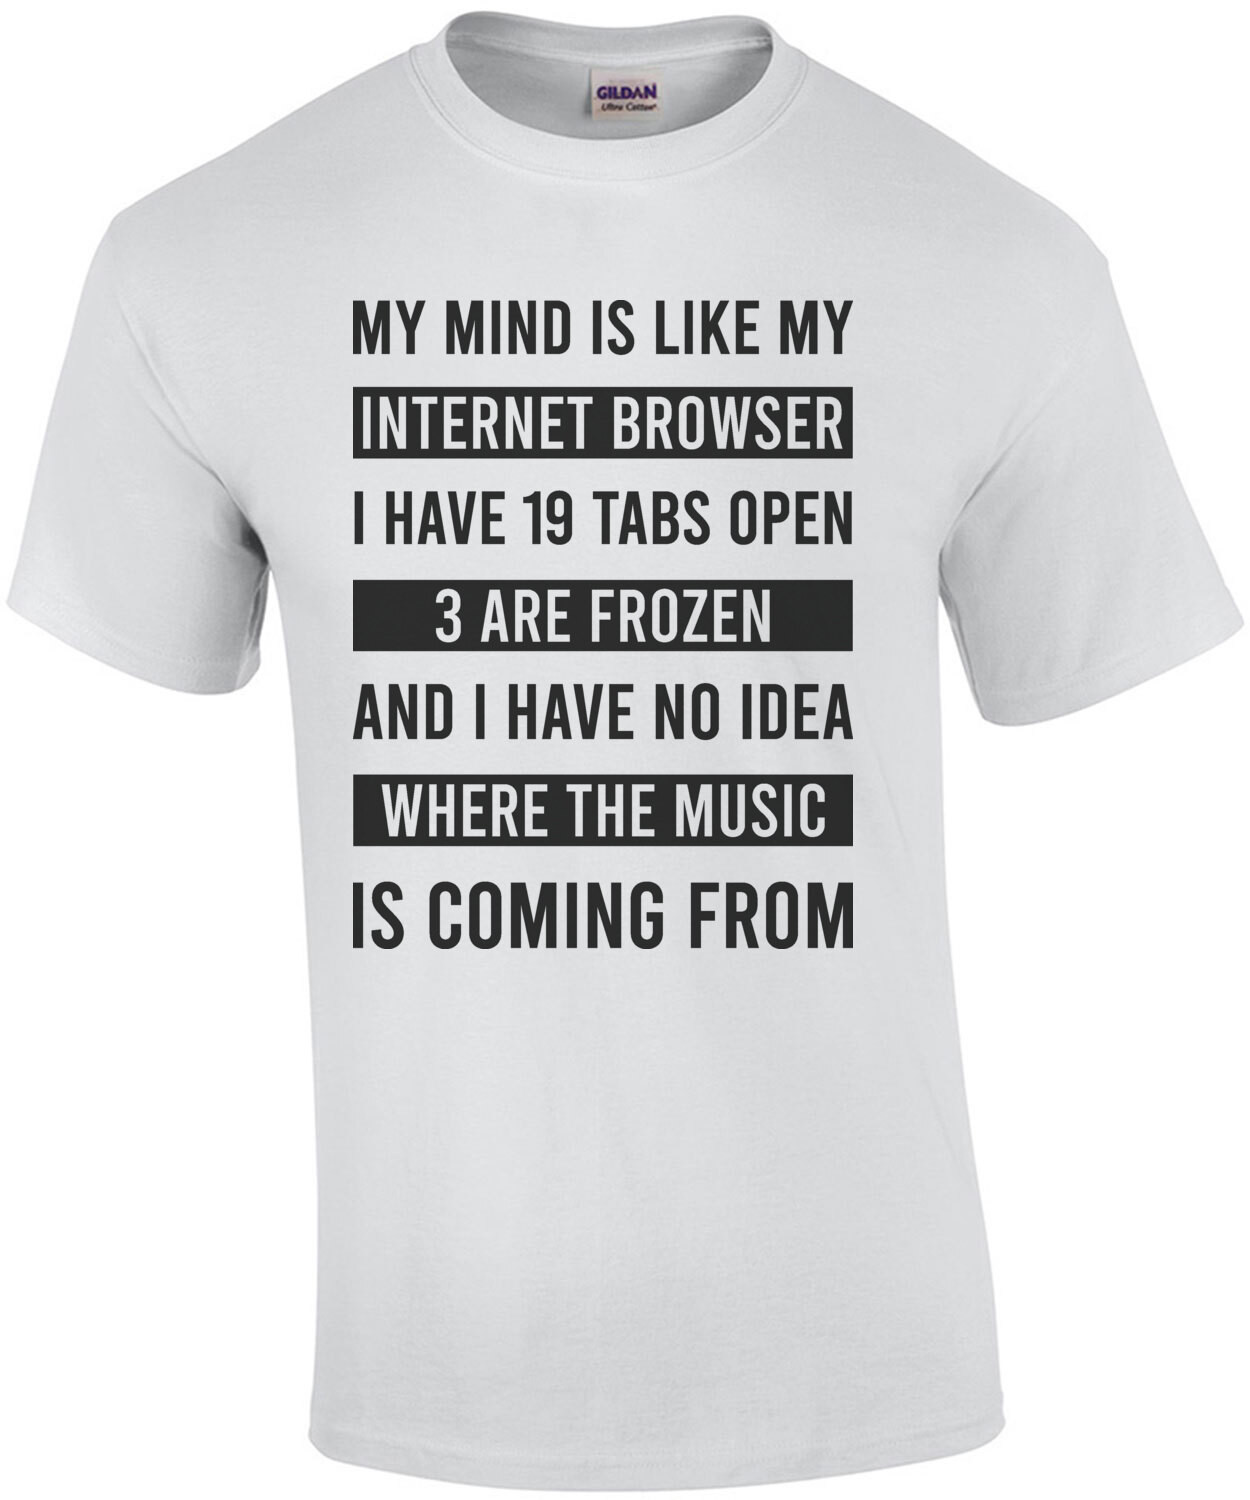 My mind is like my Internet Browser - I have 19 tabs open - funny t-shirt